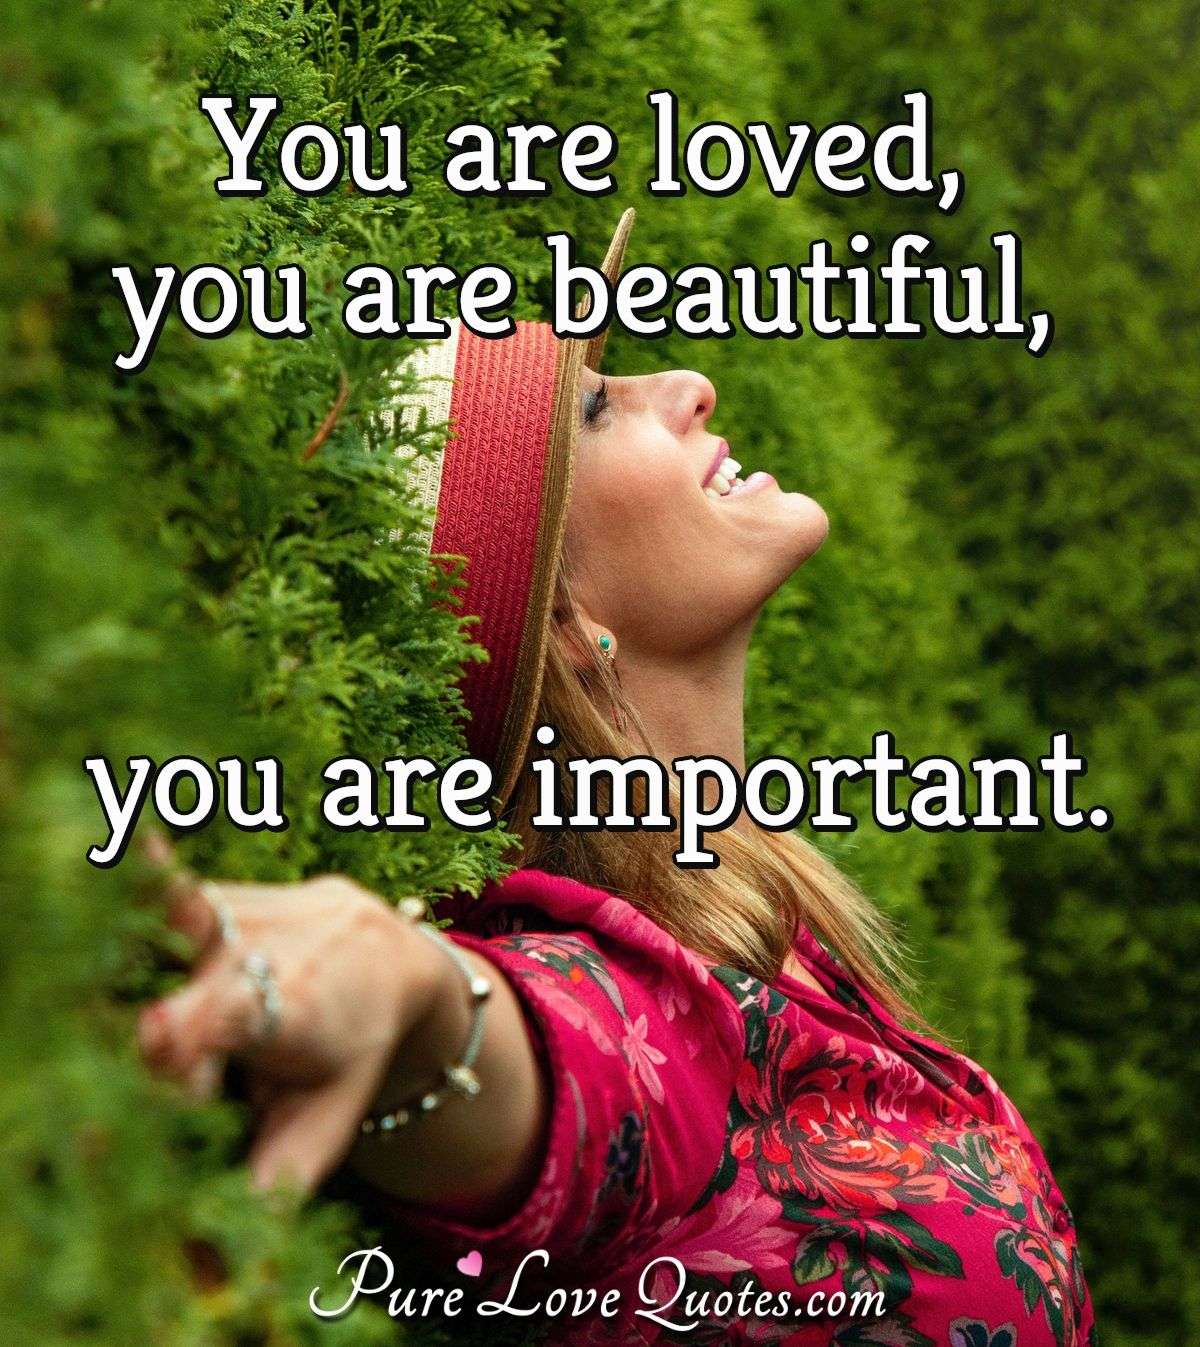 You are loved, you are beautiful, you are important. - Anonymous